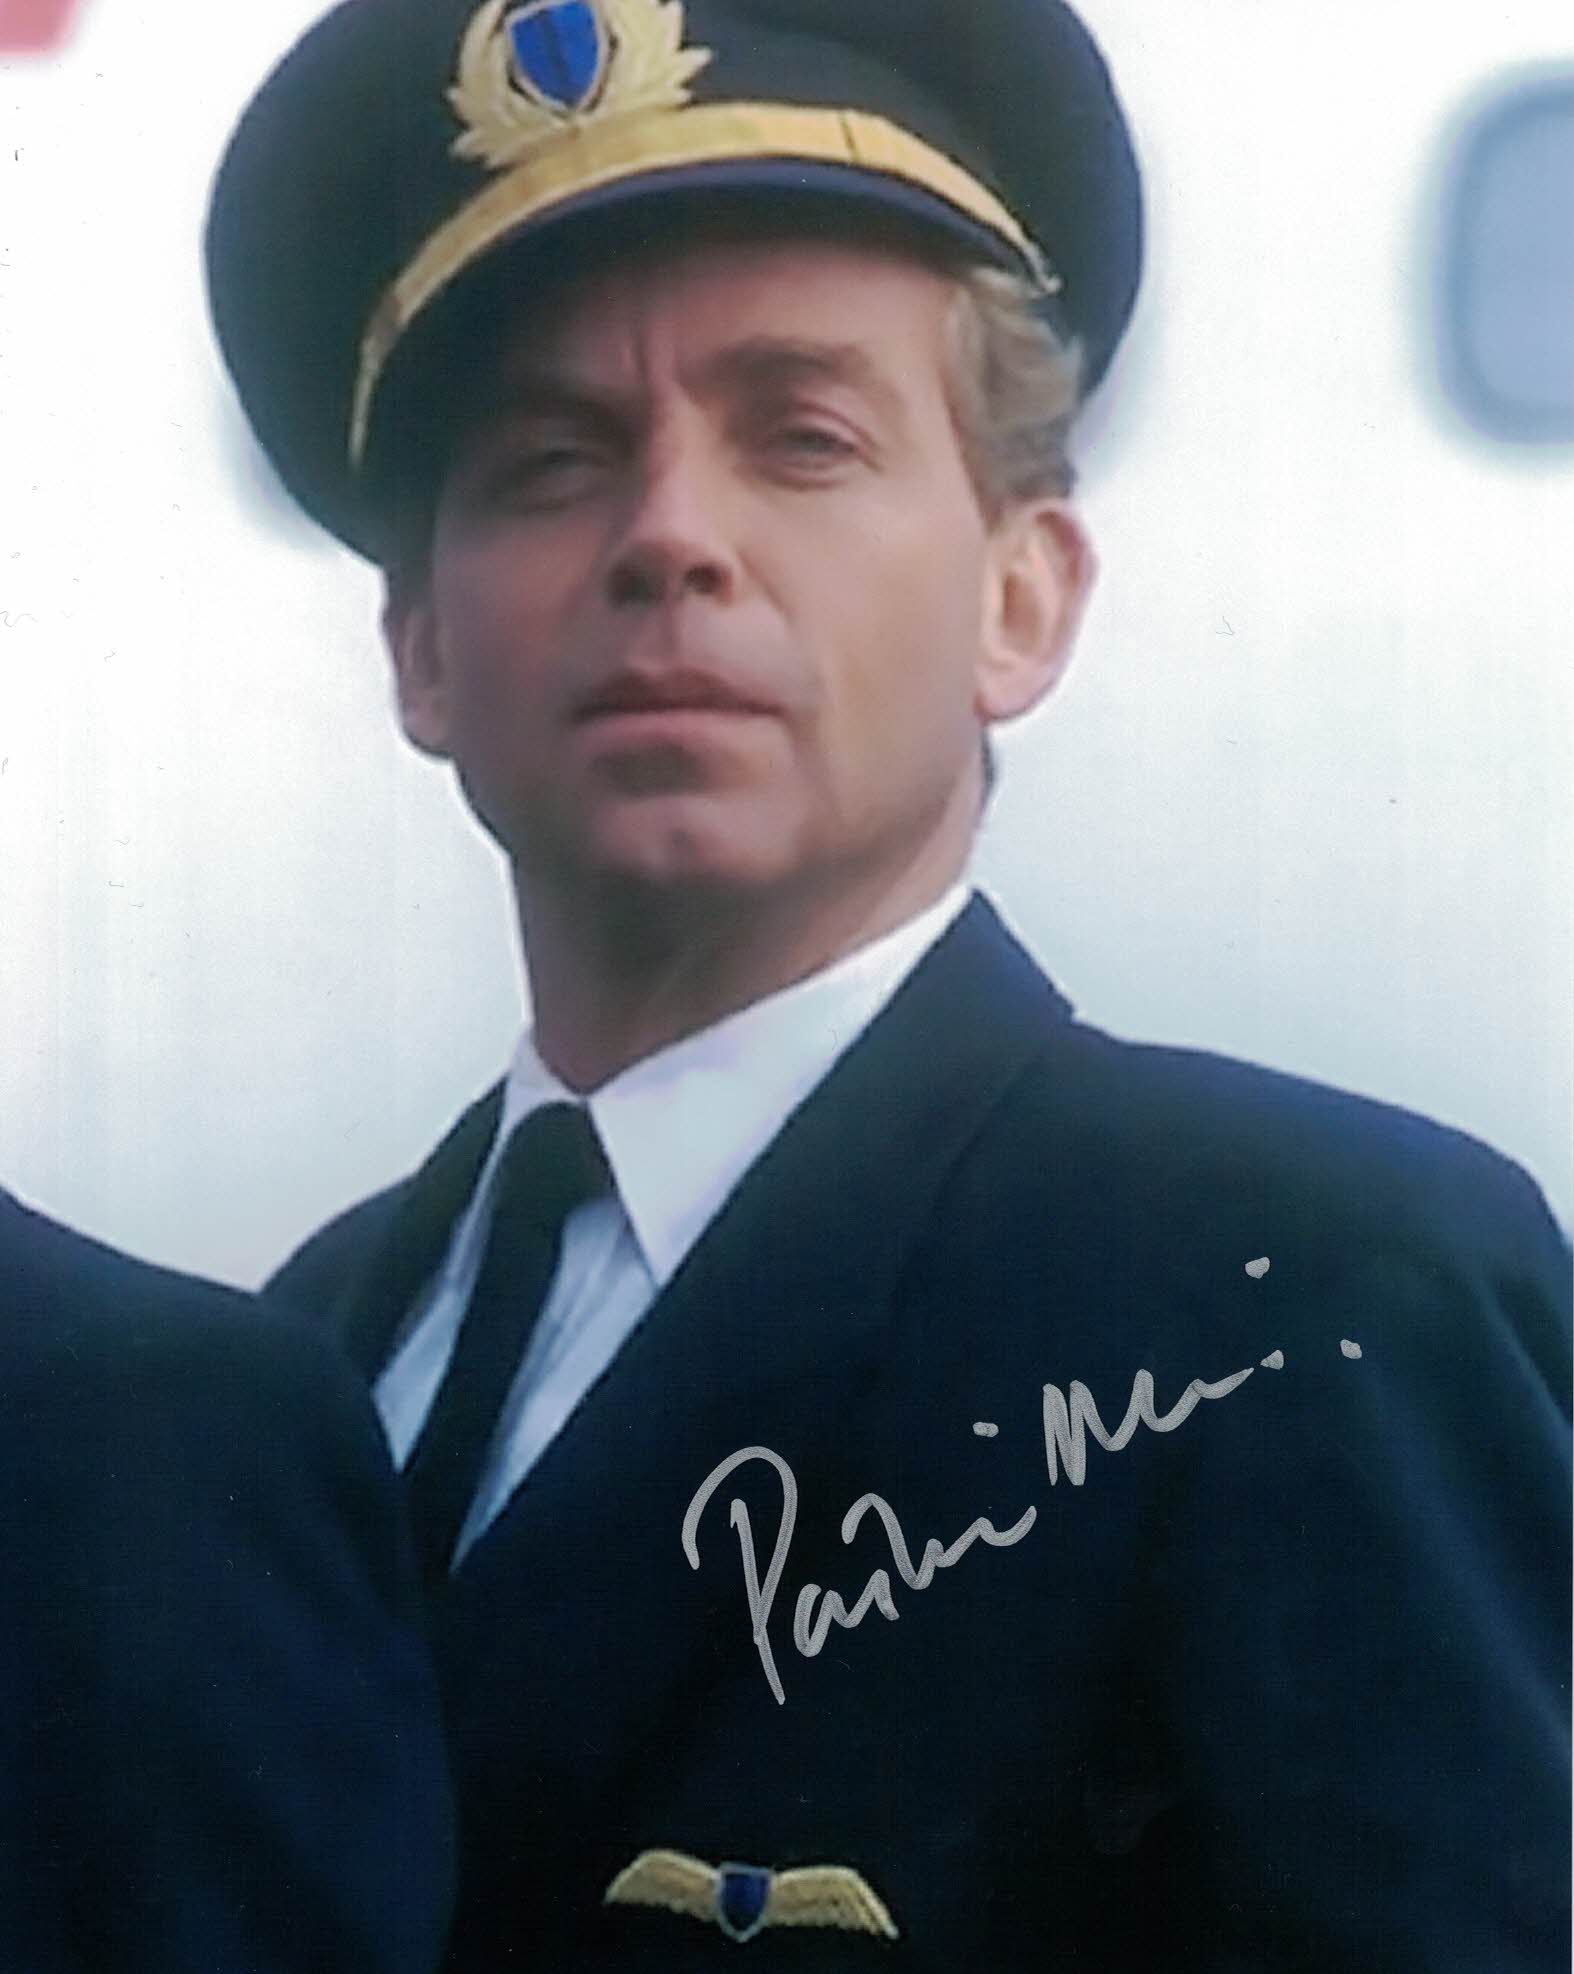 PATRICK RYECART - Captain Duff in The High Life hand signed 10 x 8 photo